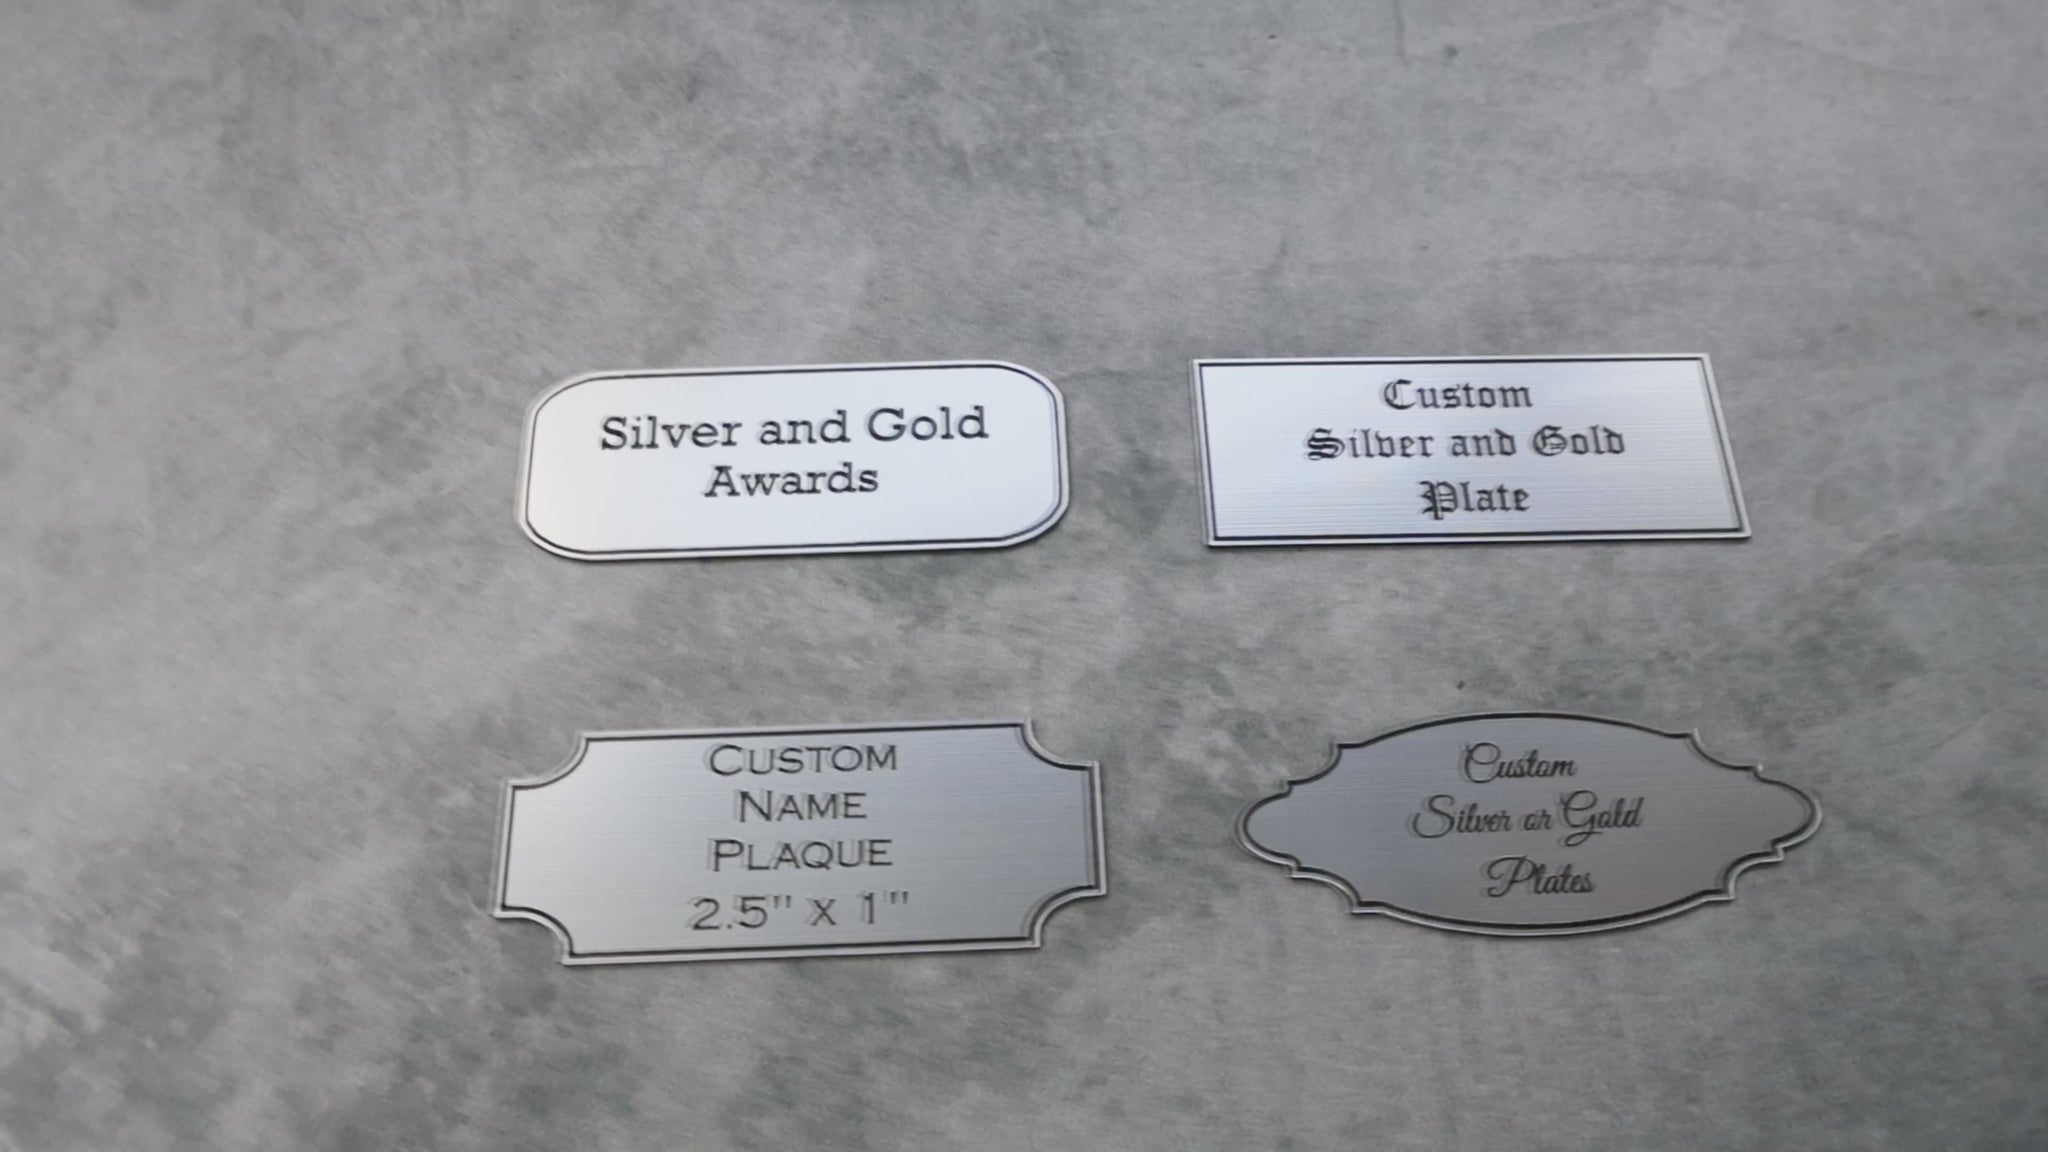 silver commemorative plate engraved flexibrass adhesive weatherproof custom metal label personalized plaque museum art awards tags name tag recognition labels pet loss label brass interior gold plaque silver plaque custom collection army memorial